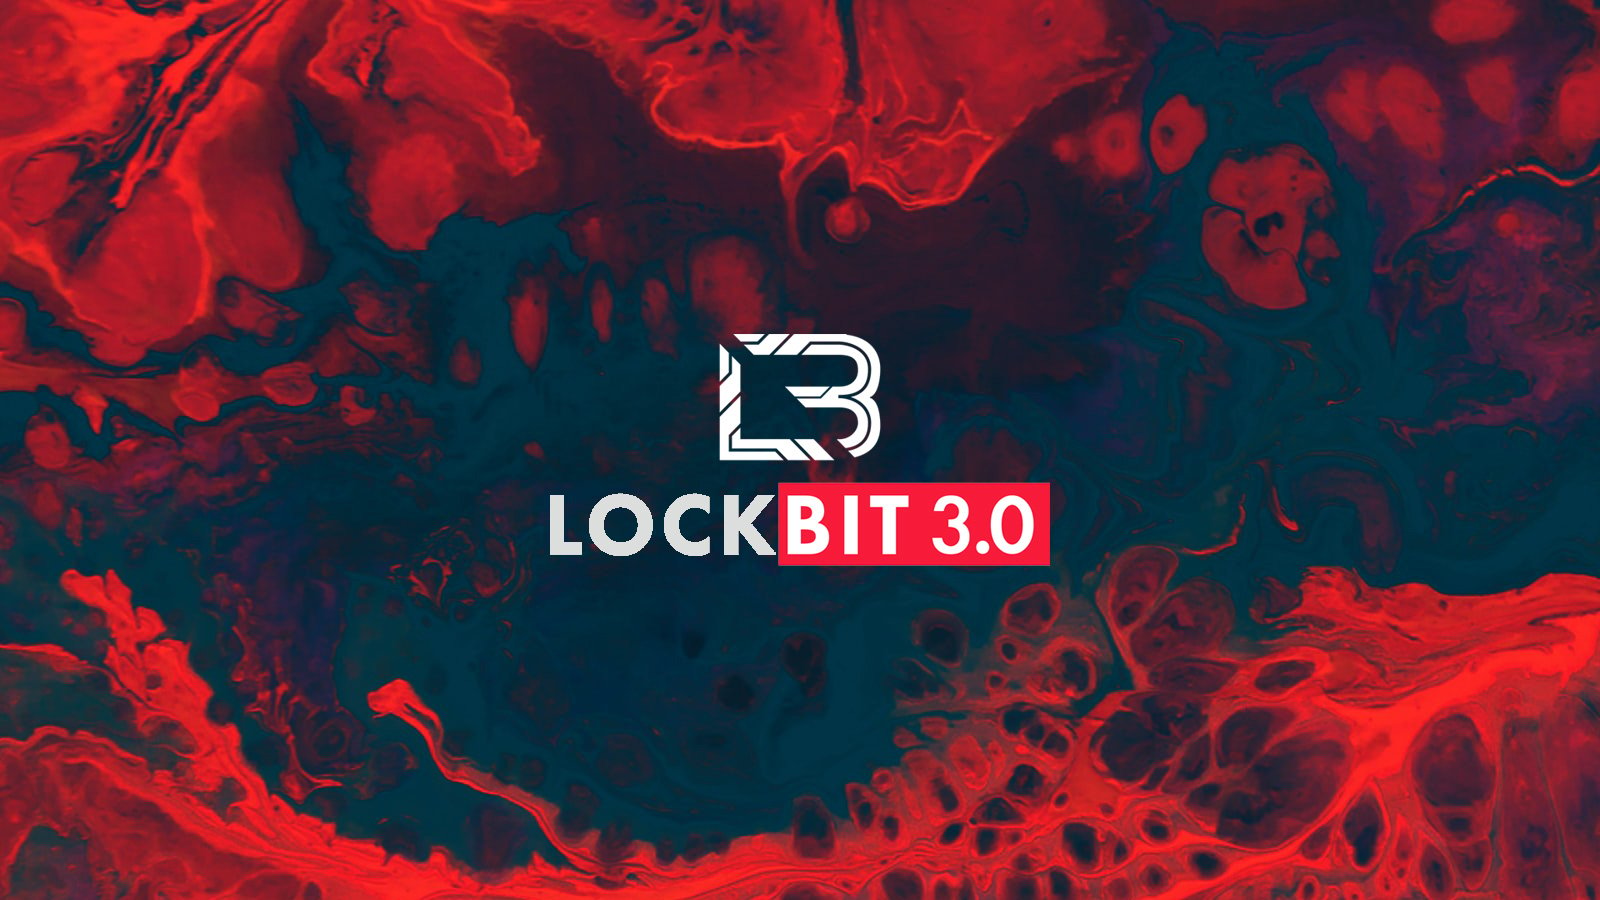 LockBit ransomware gang plans on adding DDoS as an extortion tactic